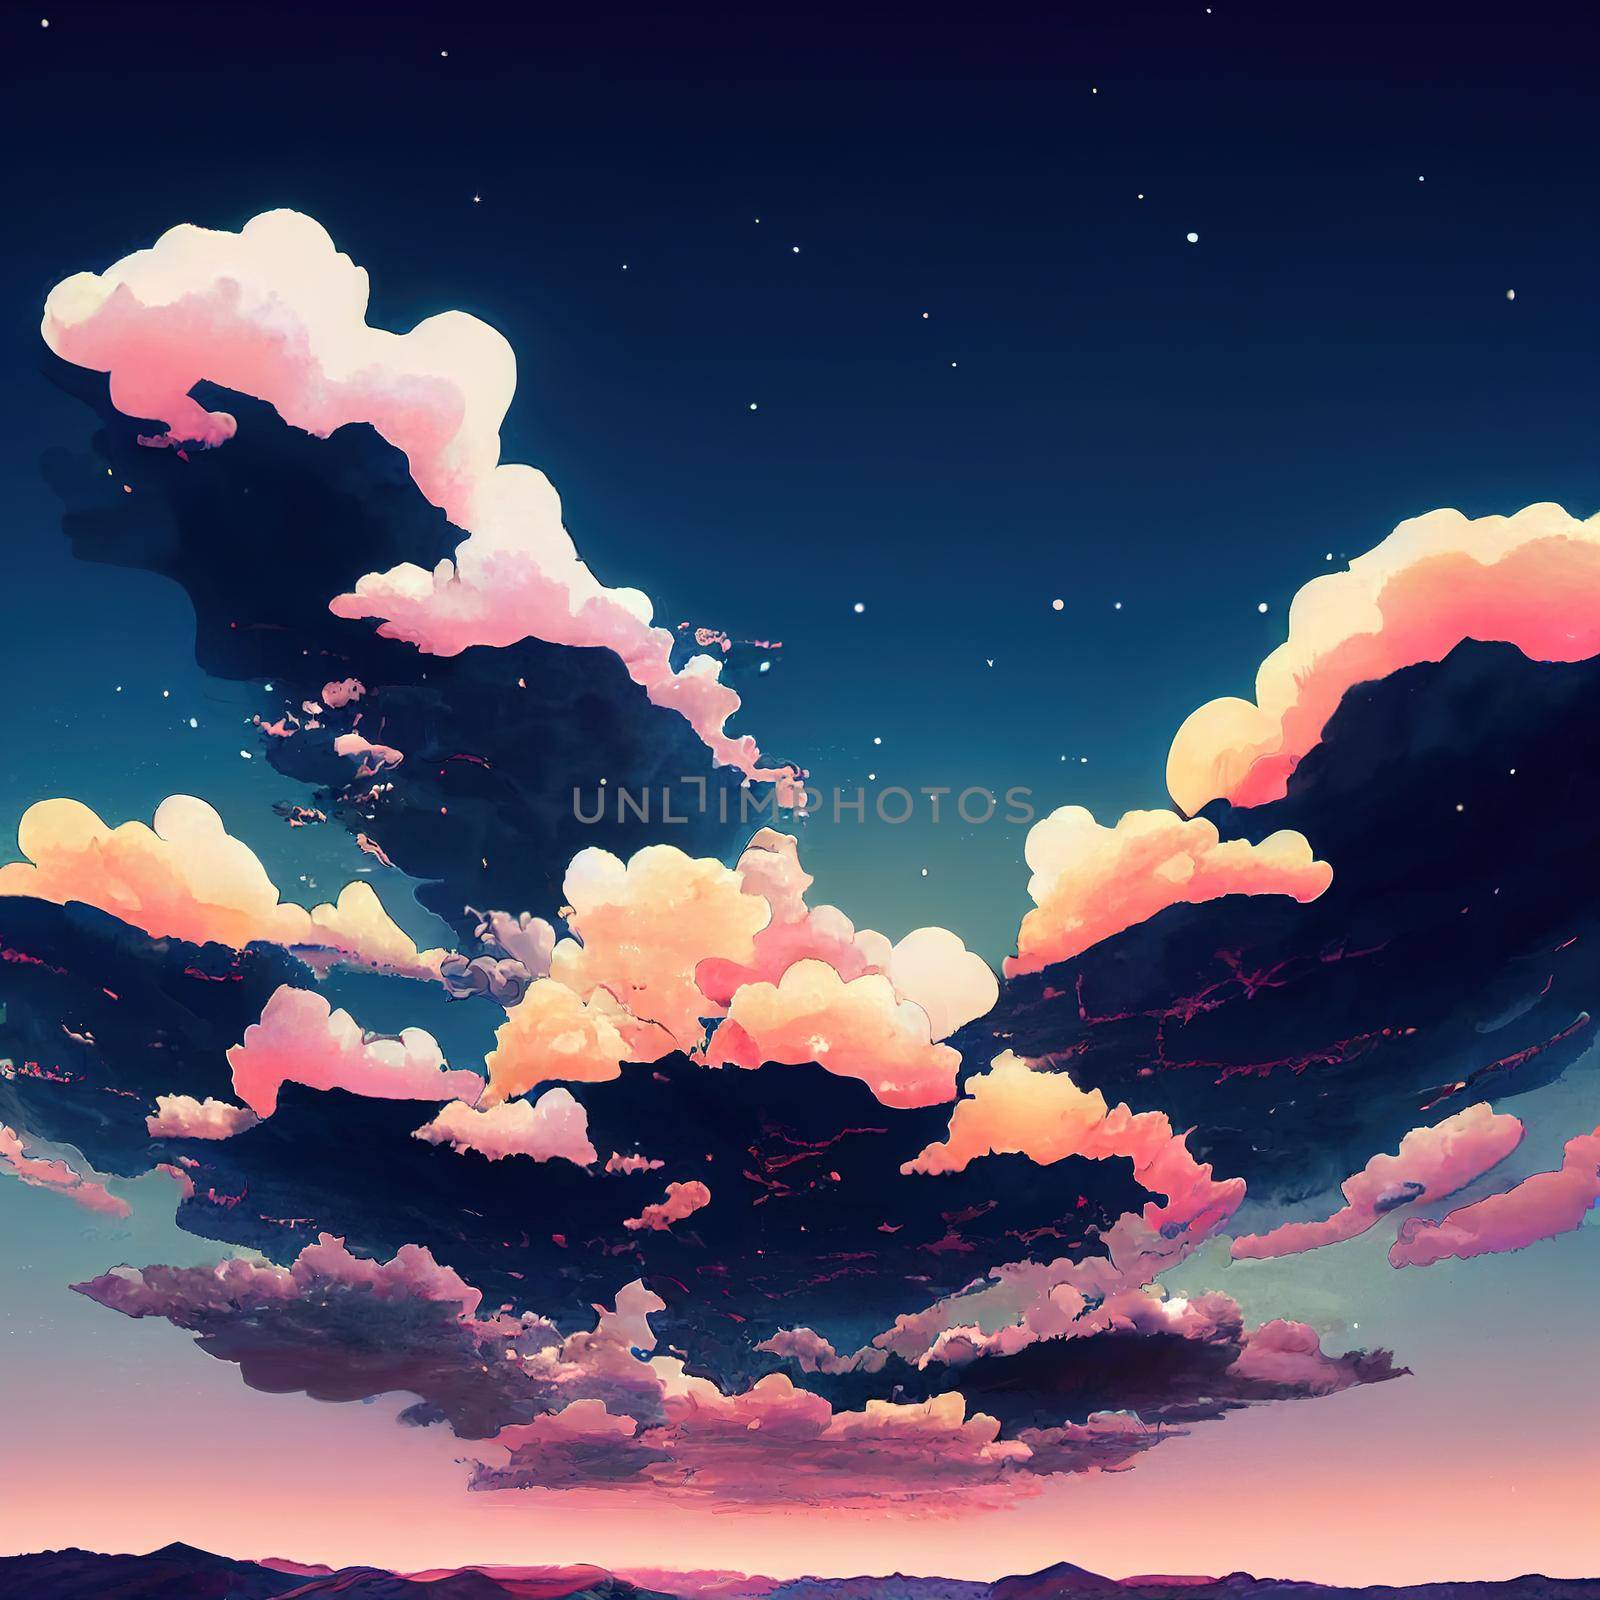 anime evening clouds 6. High quality 3d illustration